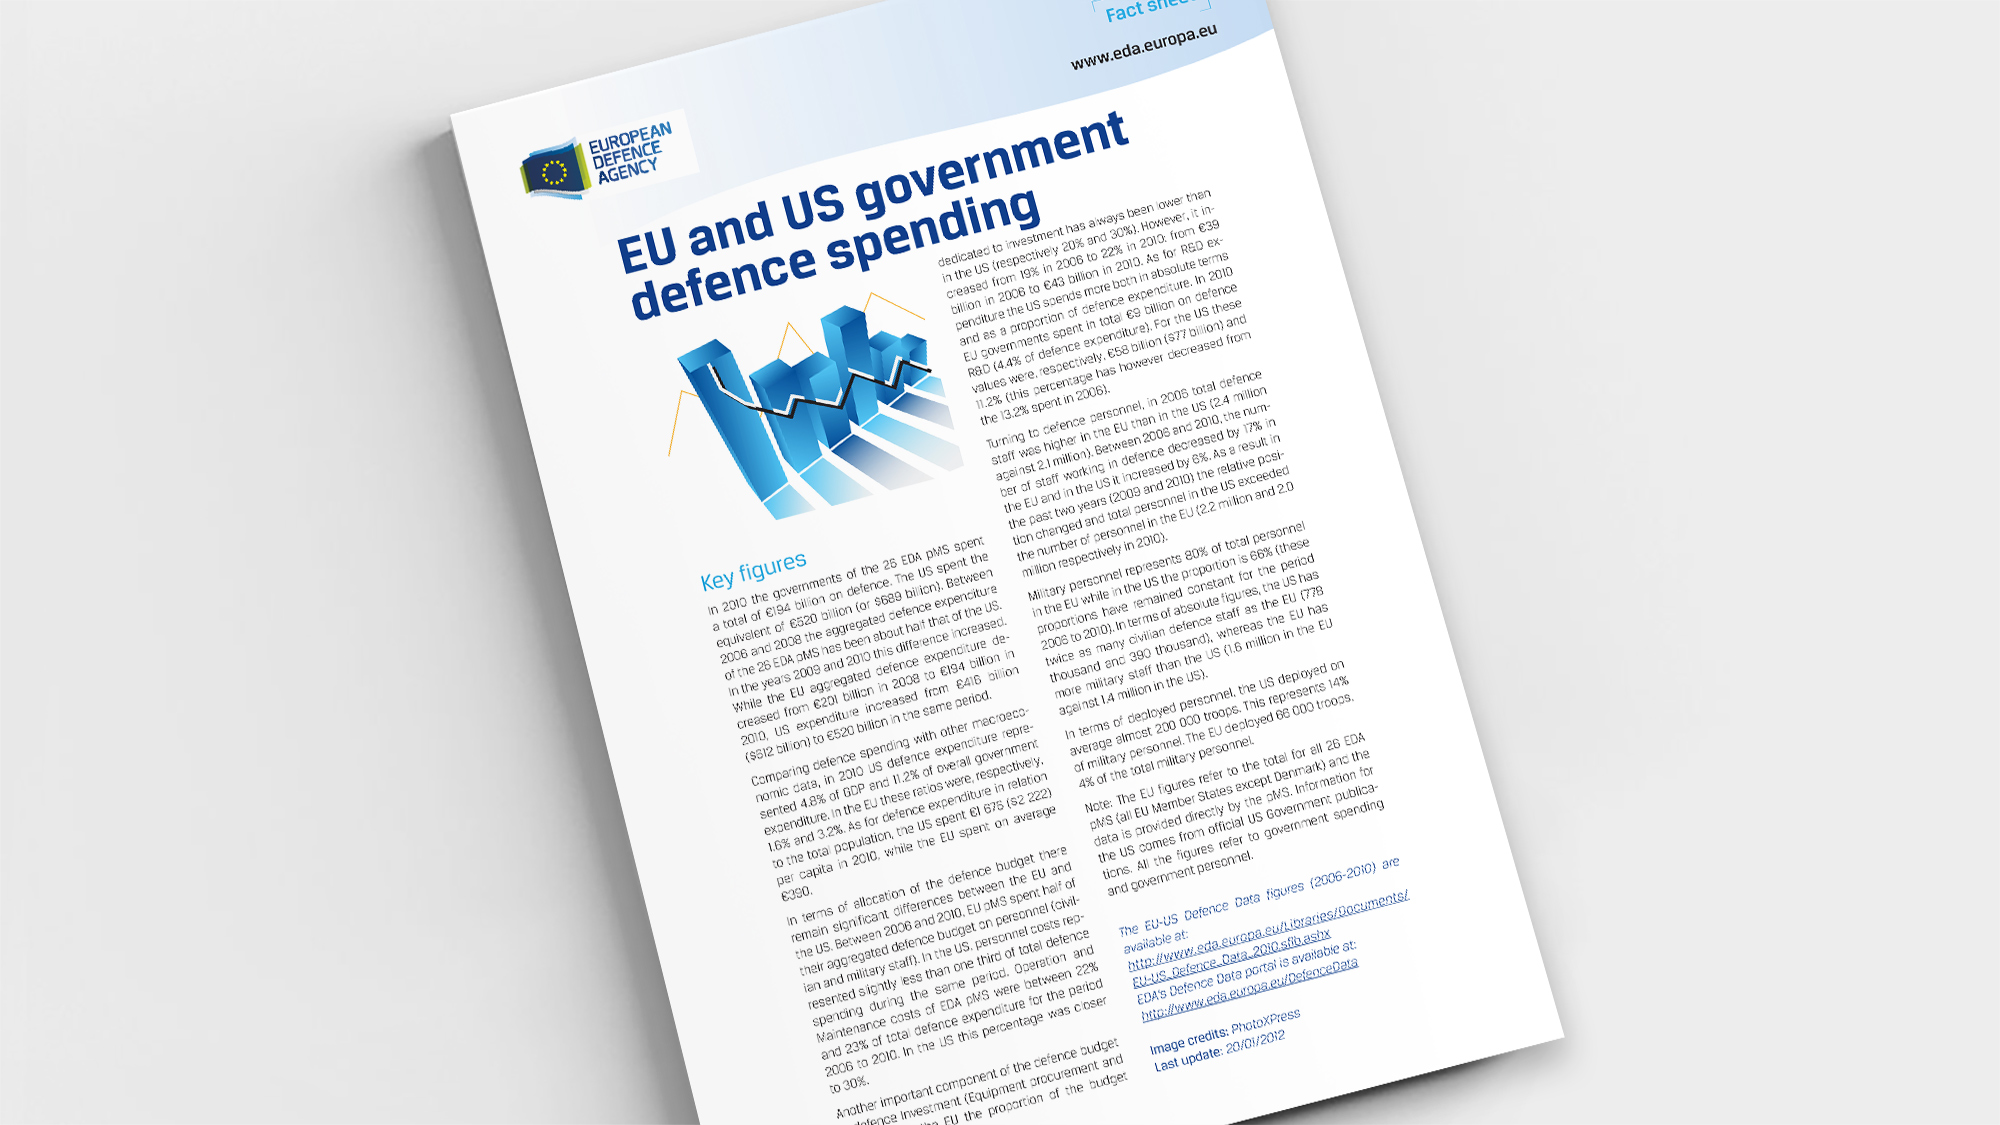 Factsheet EU and US government defence spending